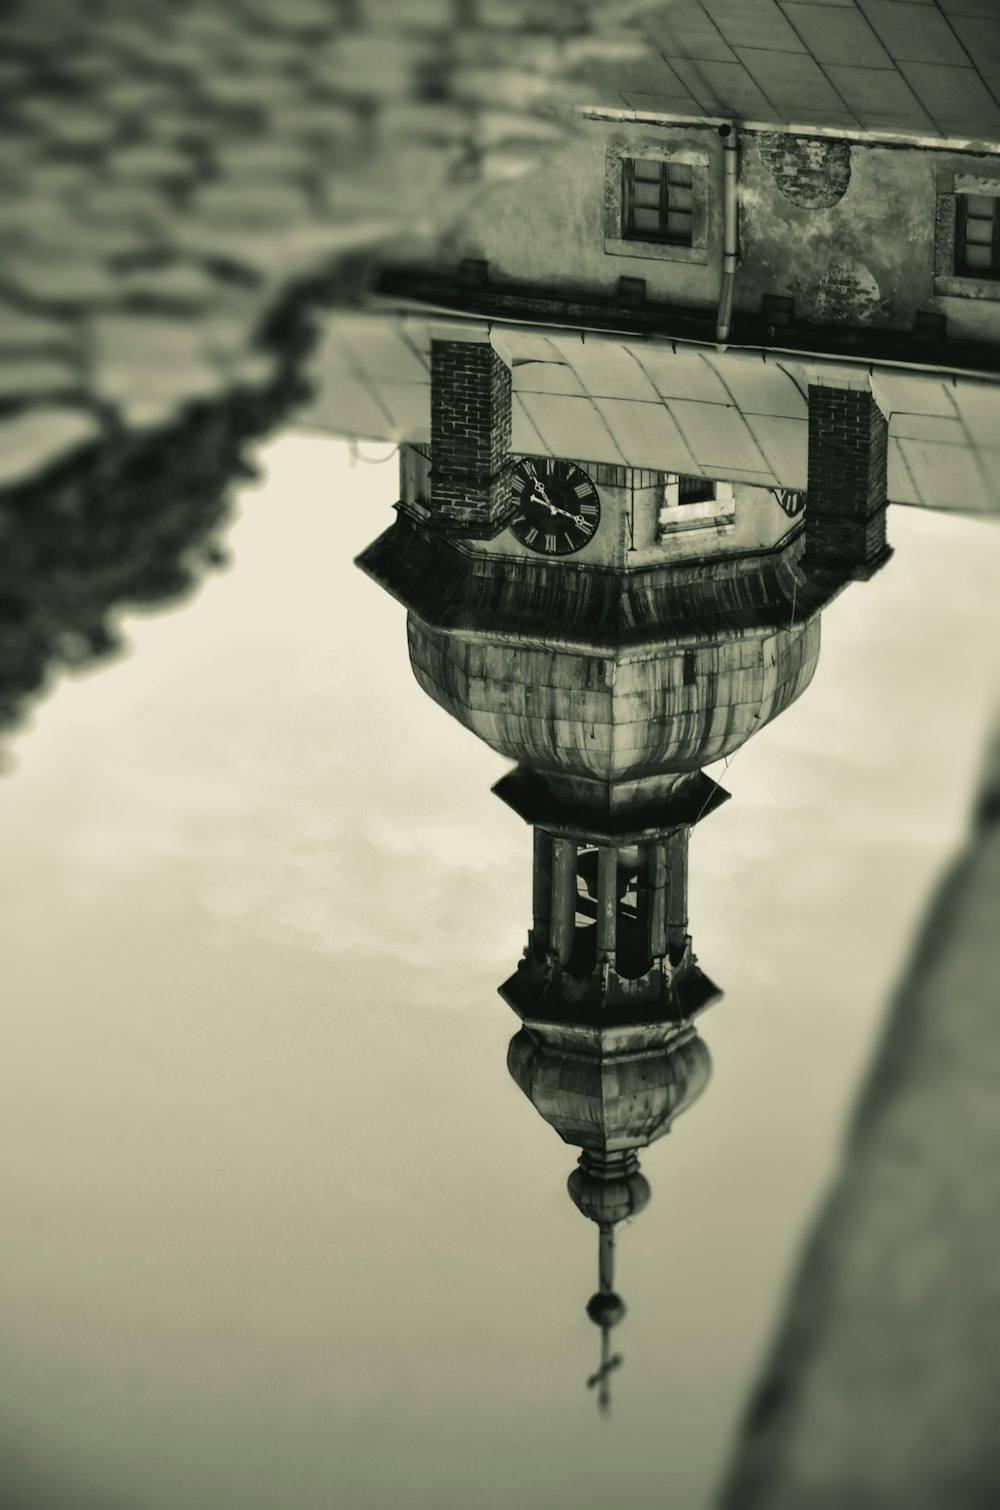 a reflection of a clock tower in the water